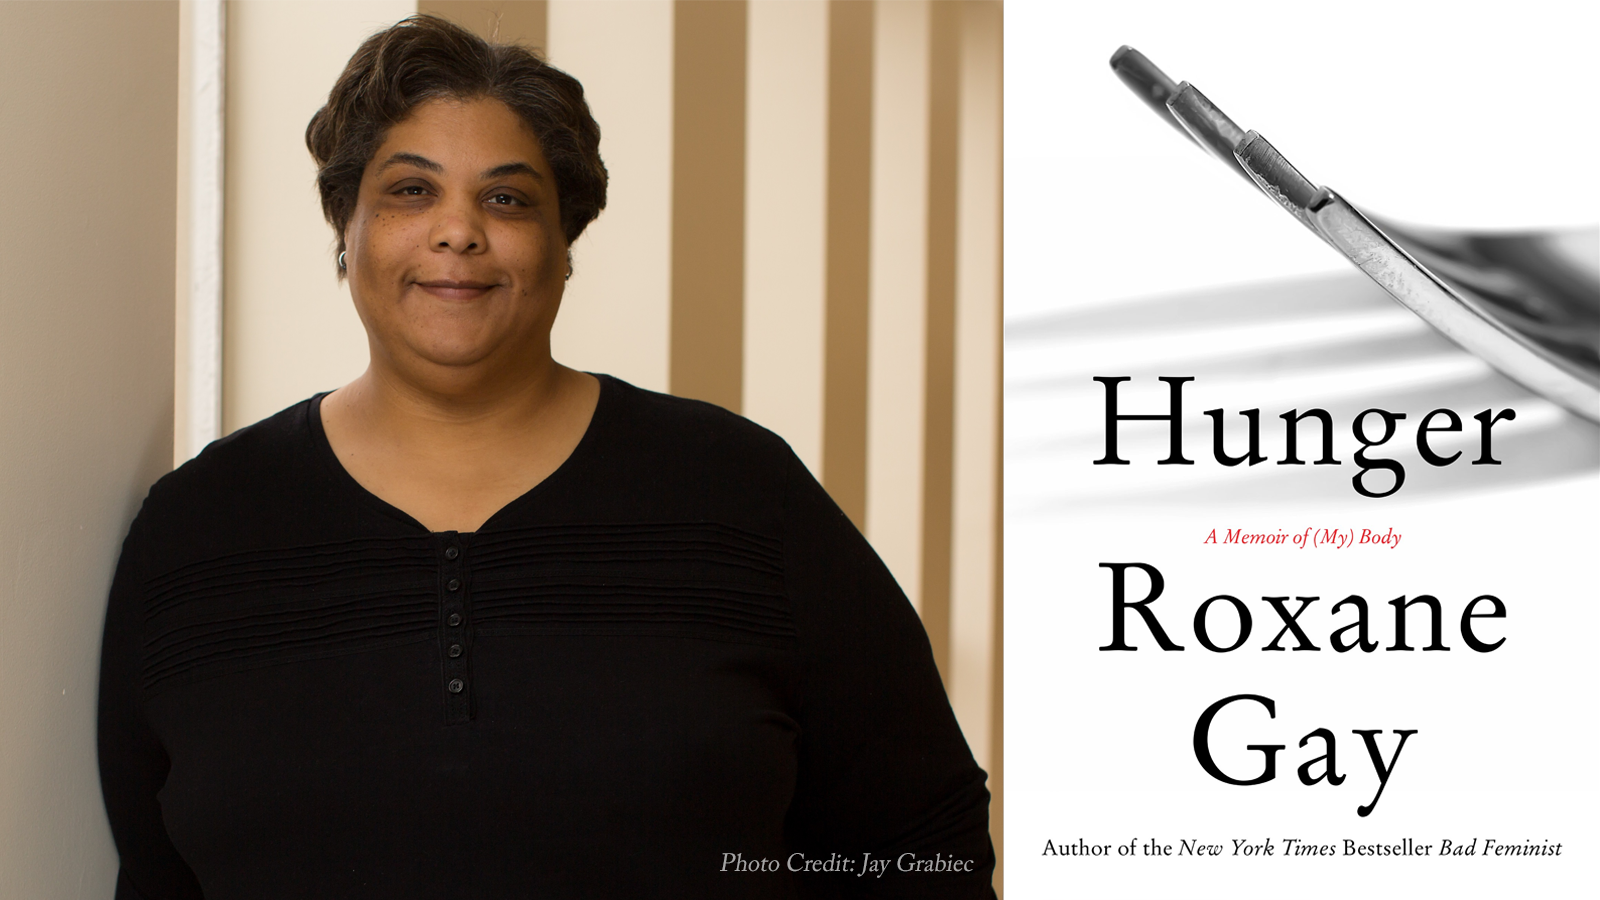 Cover of Hunger and photo of Roxane Gay by Jay Grabiec; links to news story